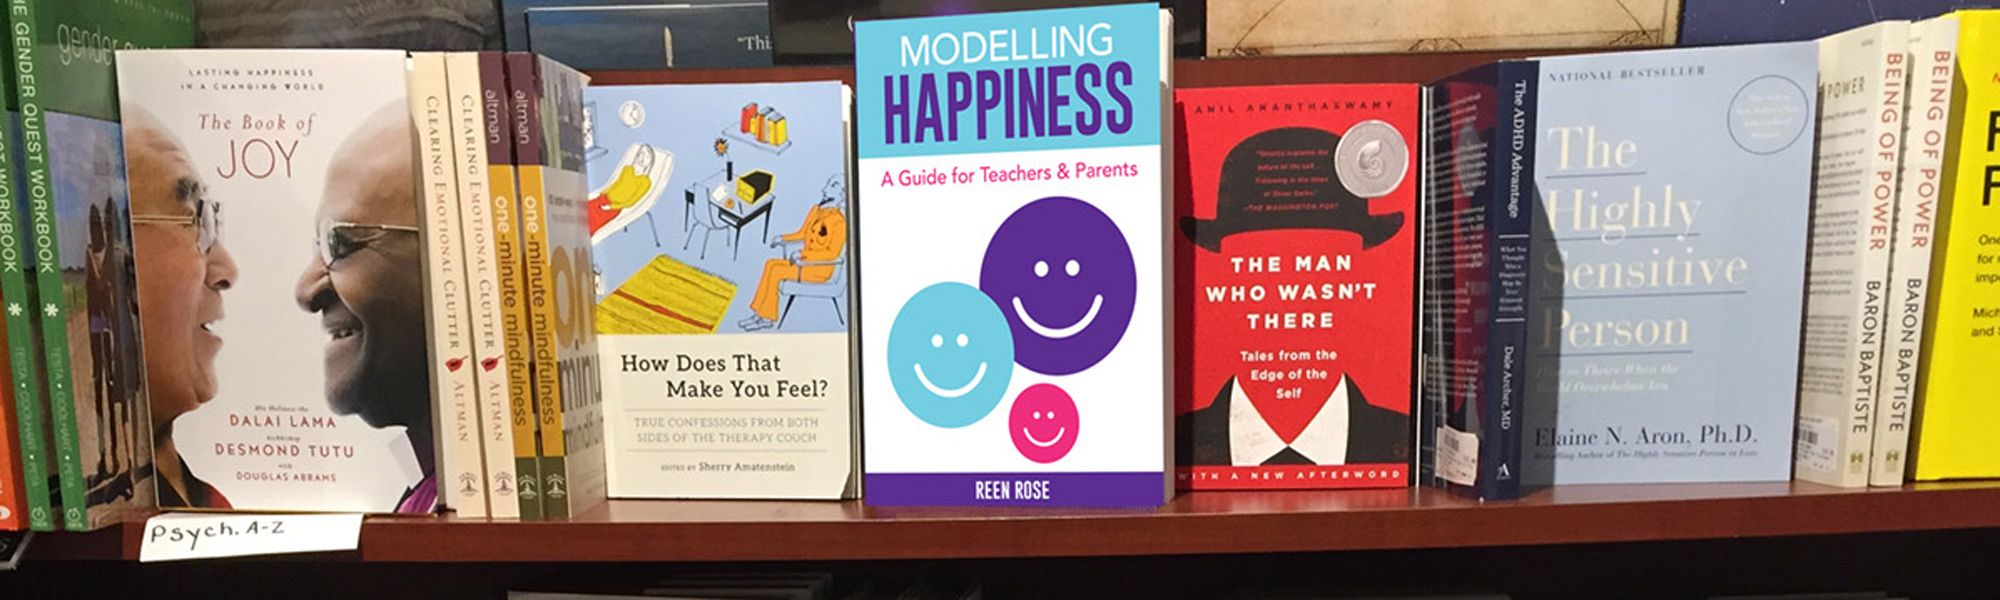 Book</h3><p>Modelling Happiness</p>